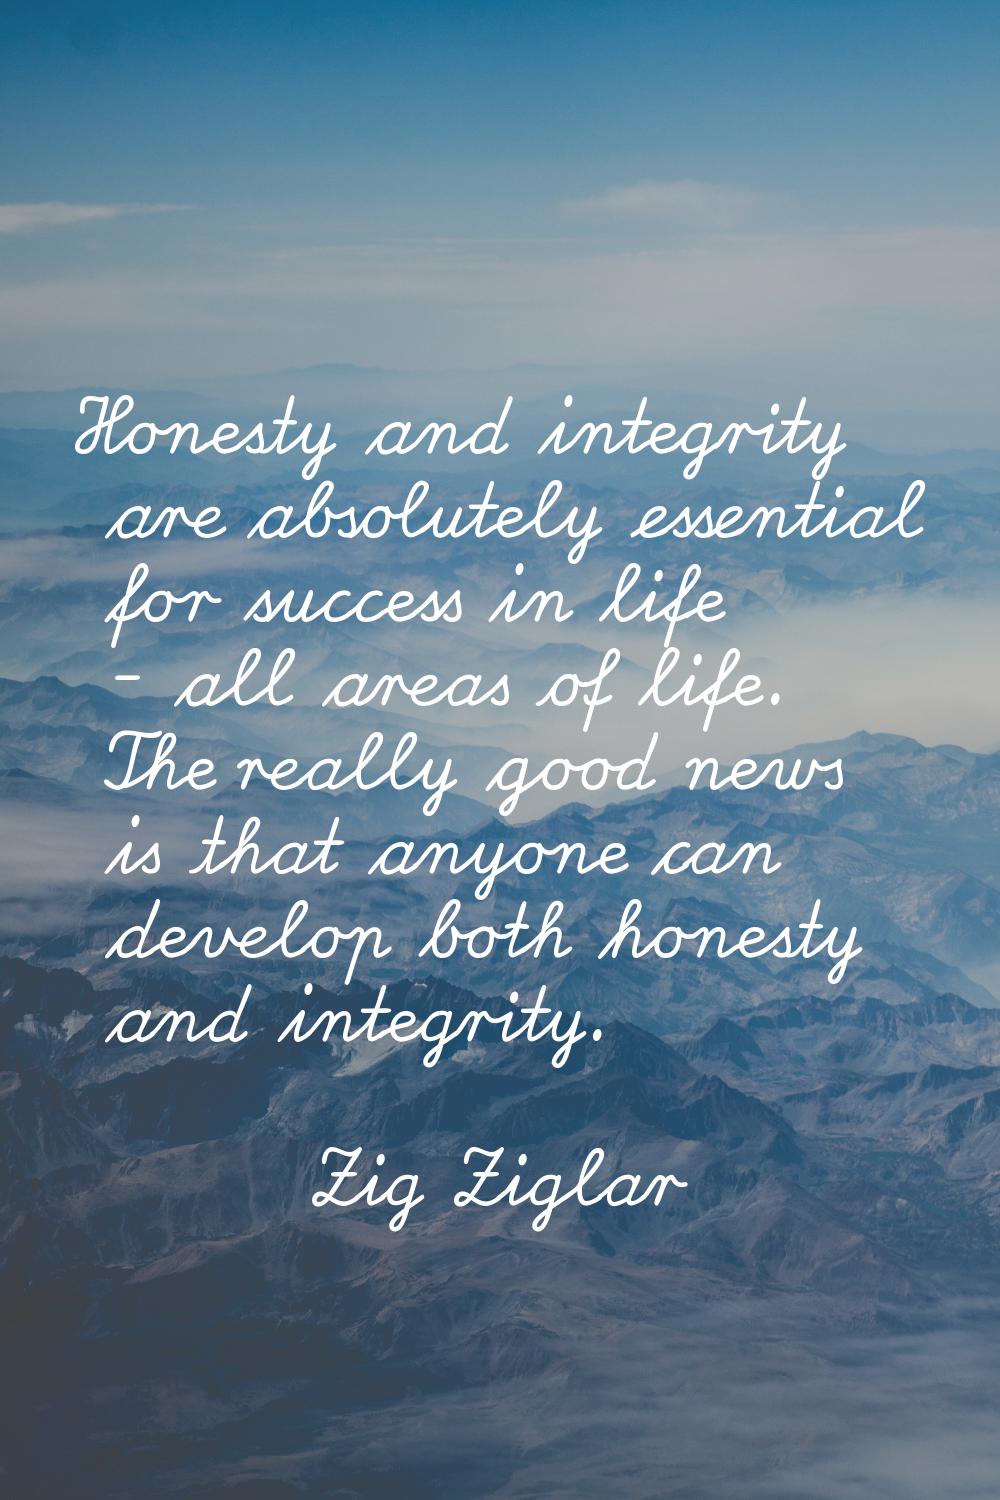 Honesty and integrity are absolutely essential for success in life - all areas of life. The really 